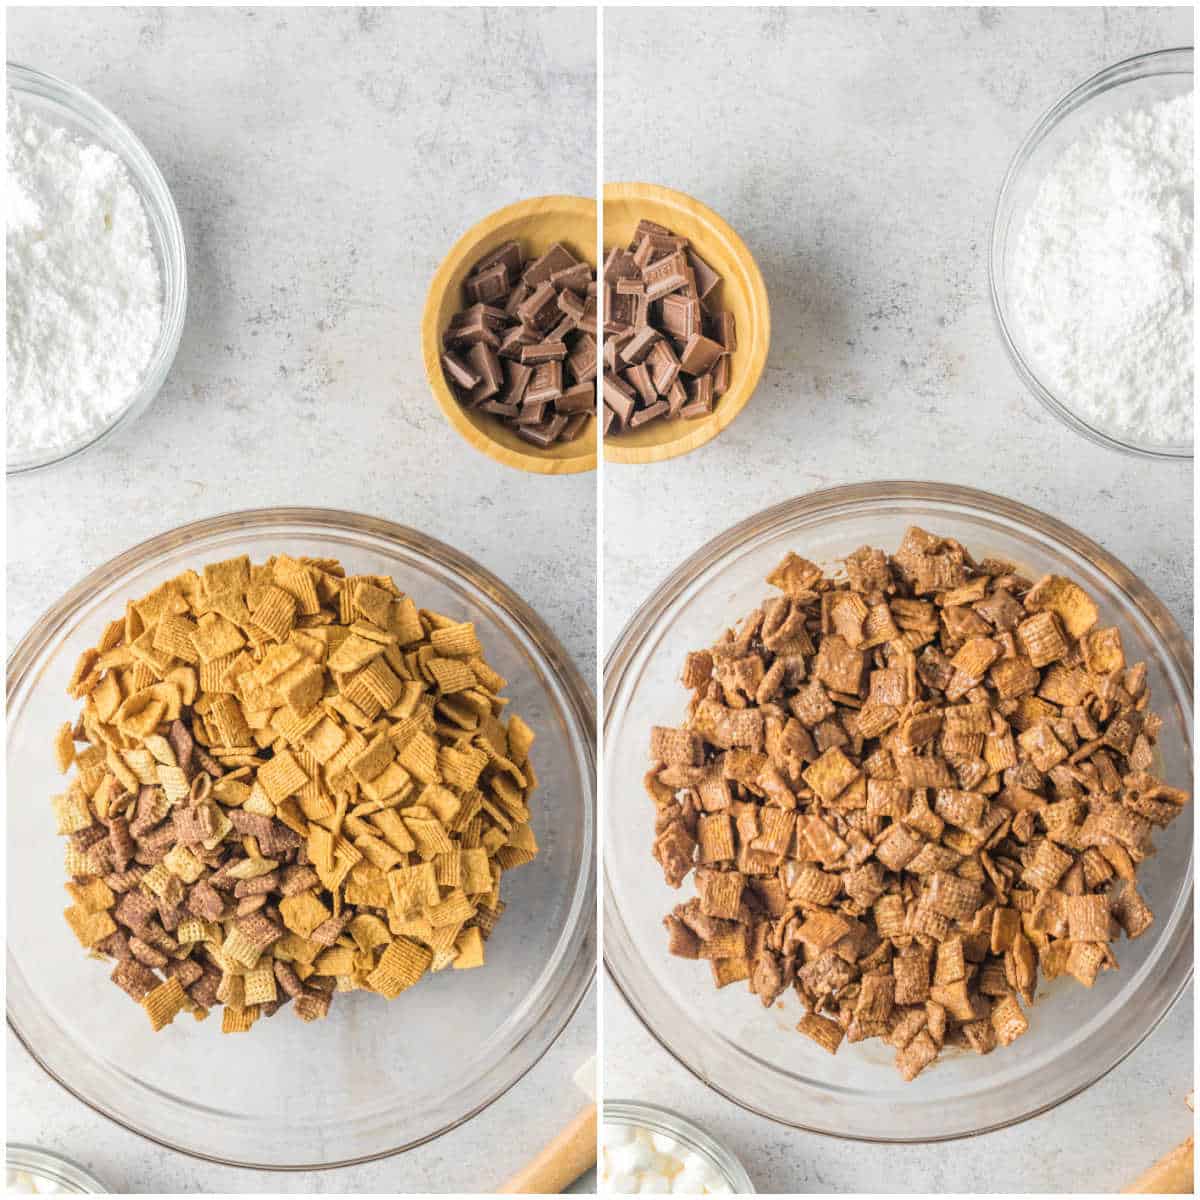 Steps to make s'mores puppy chow.